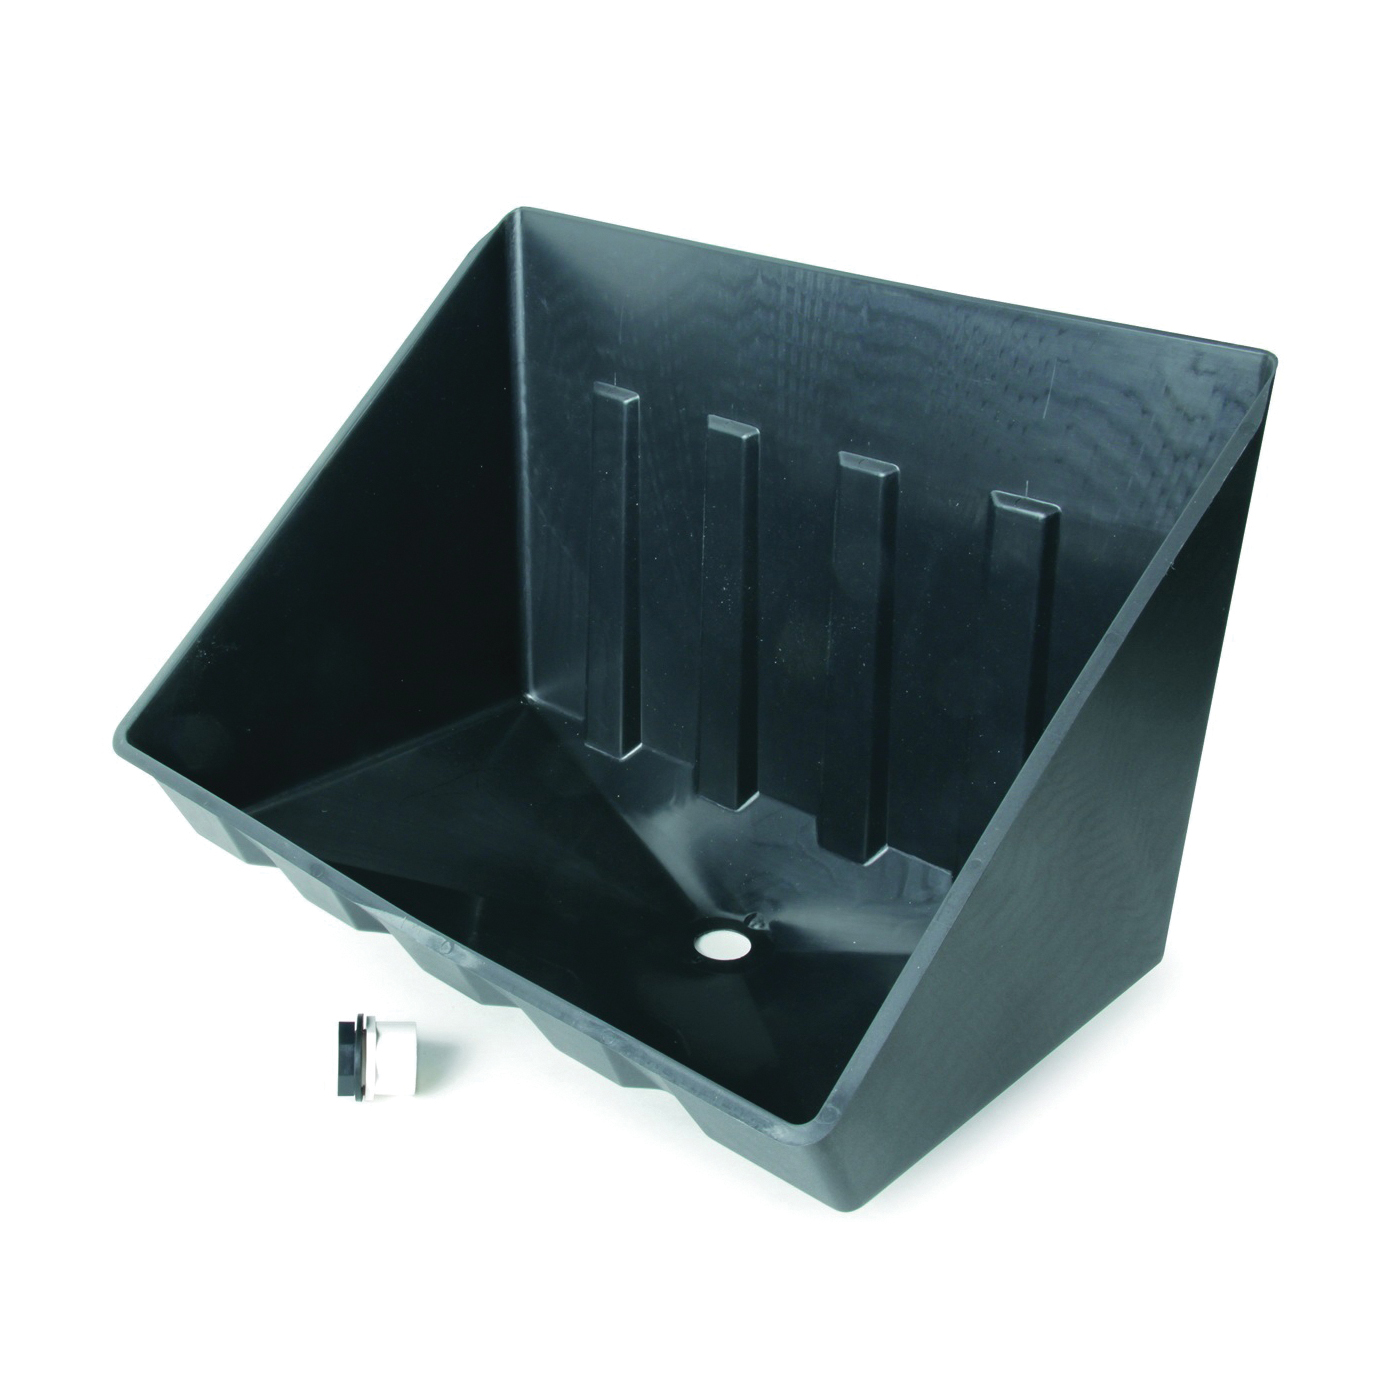 11470 Water Heater Drain Pan, Plastic, For: 20-1/2 in W x 13 in D Gas or Electric Tankless Water Heaters